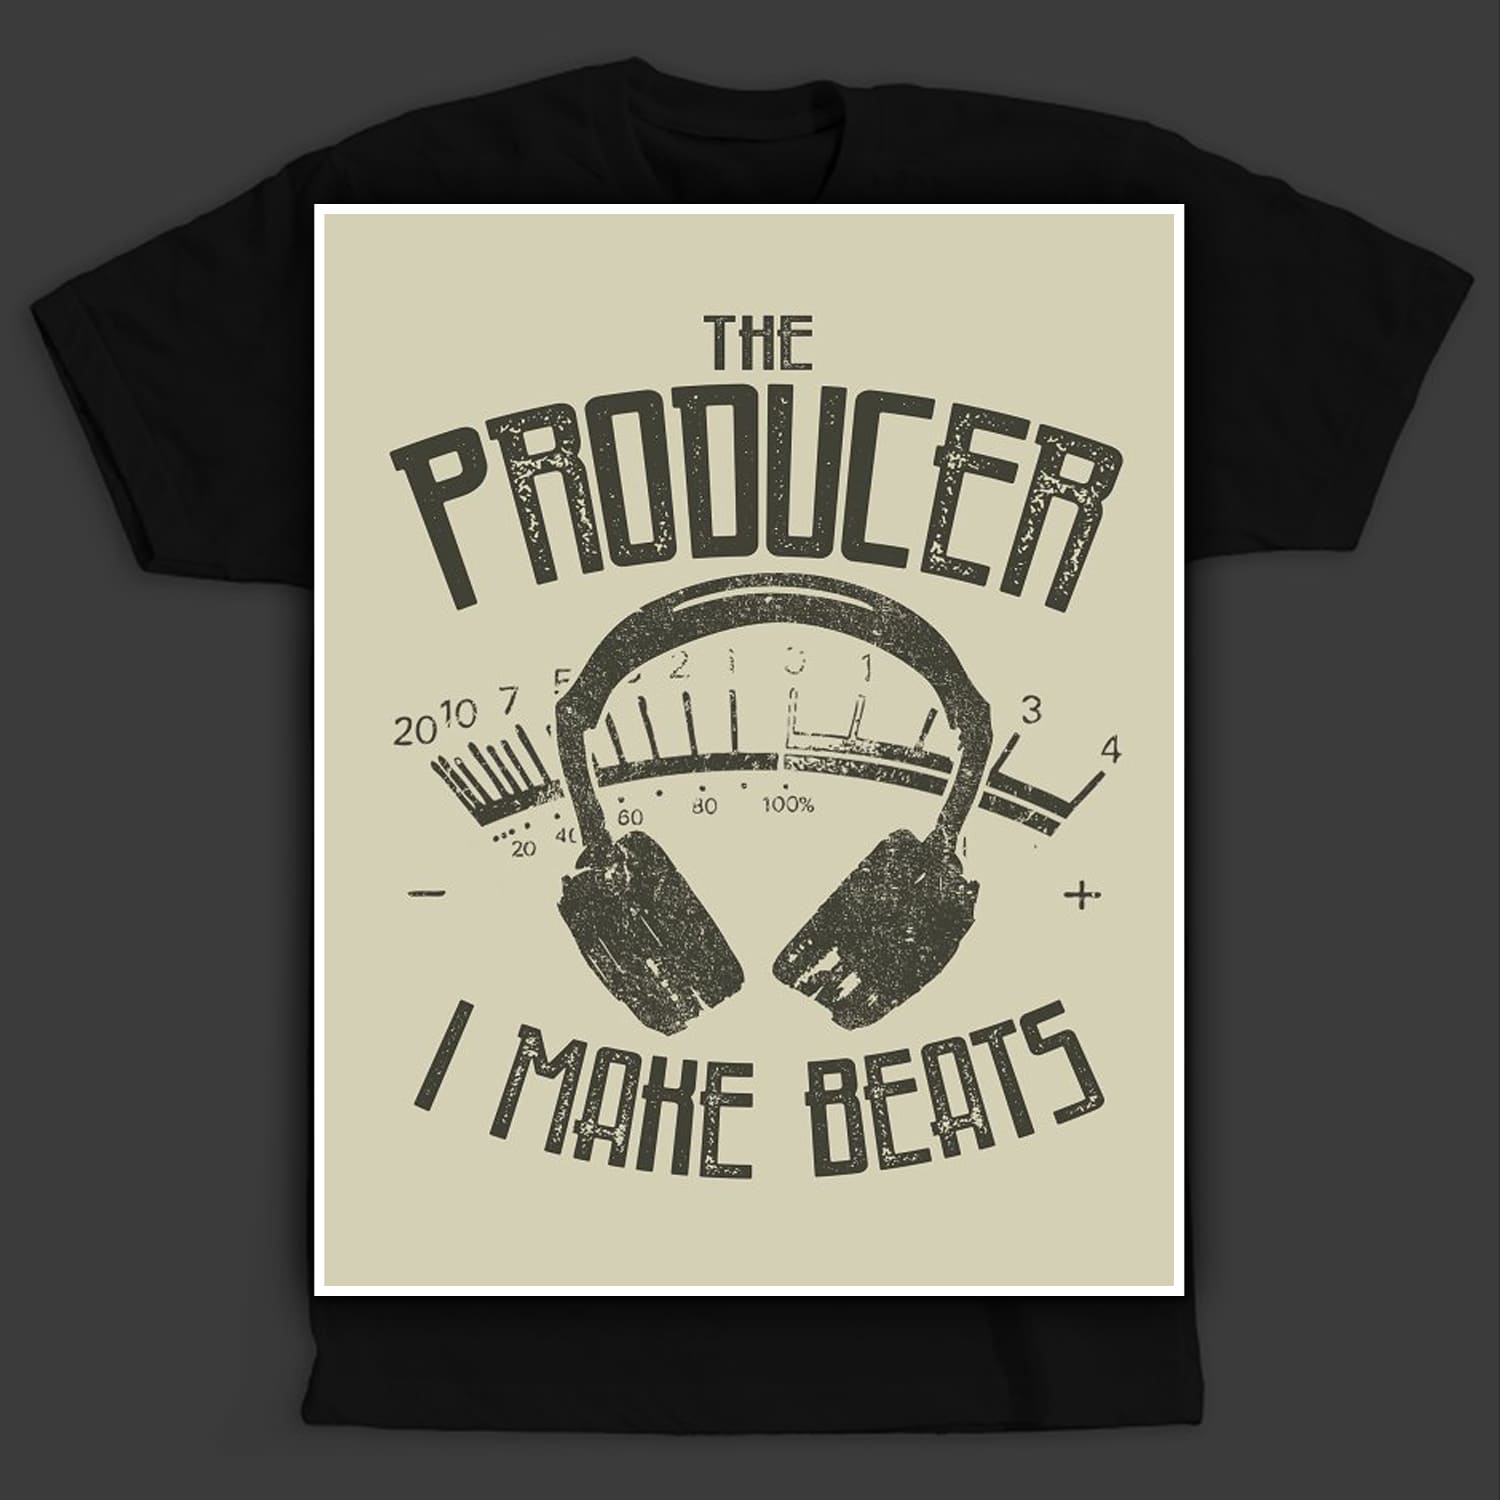 Music Producer T-Shirt Design Cover.